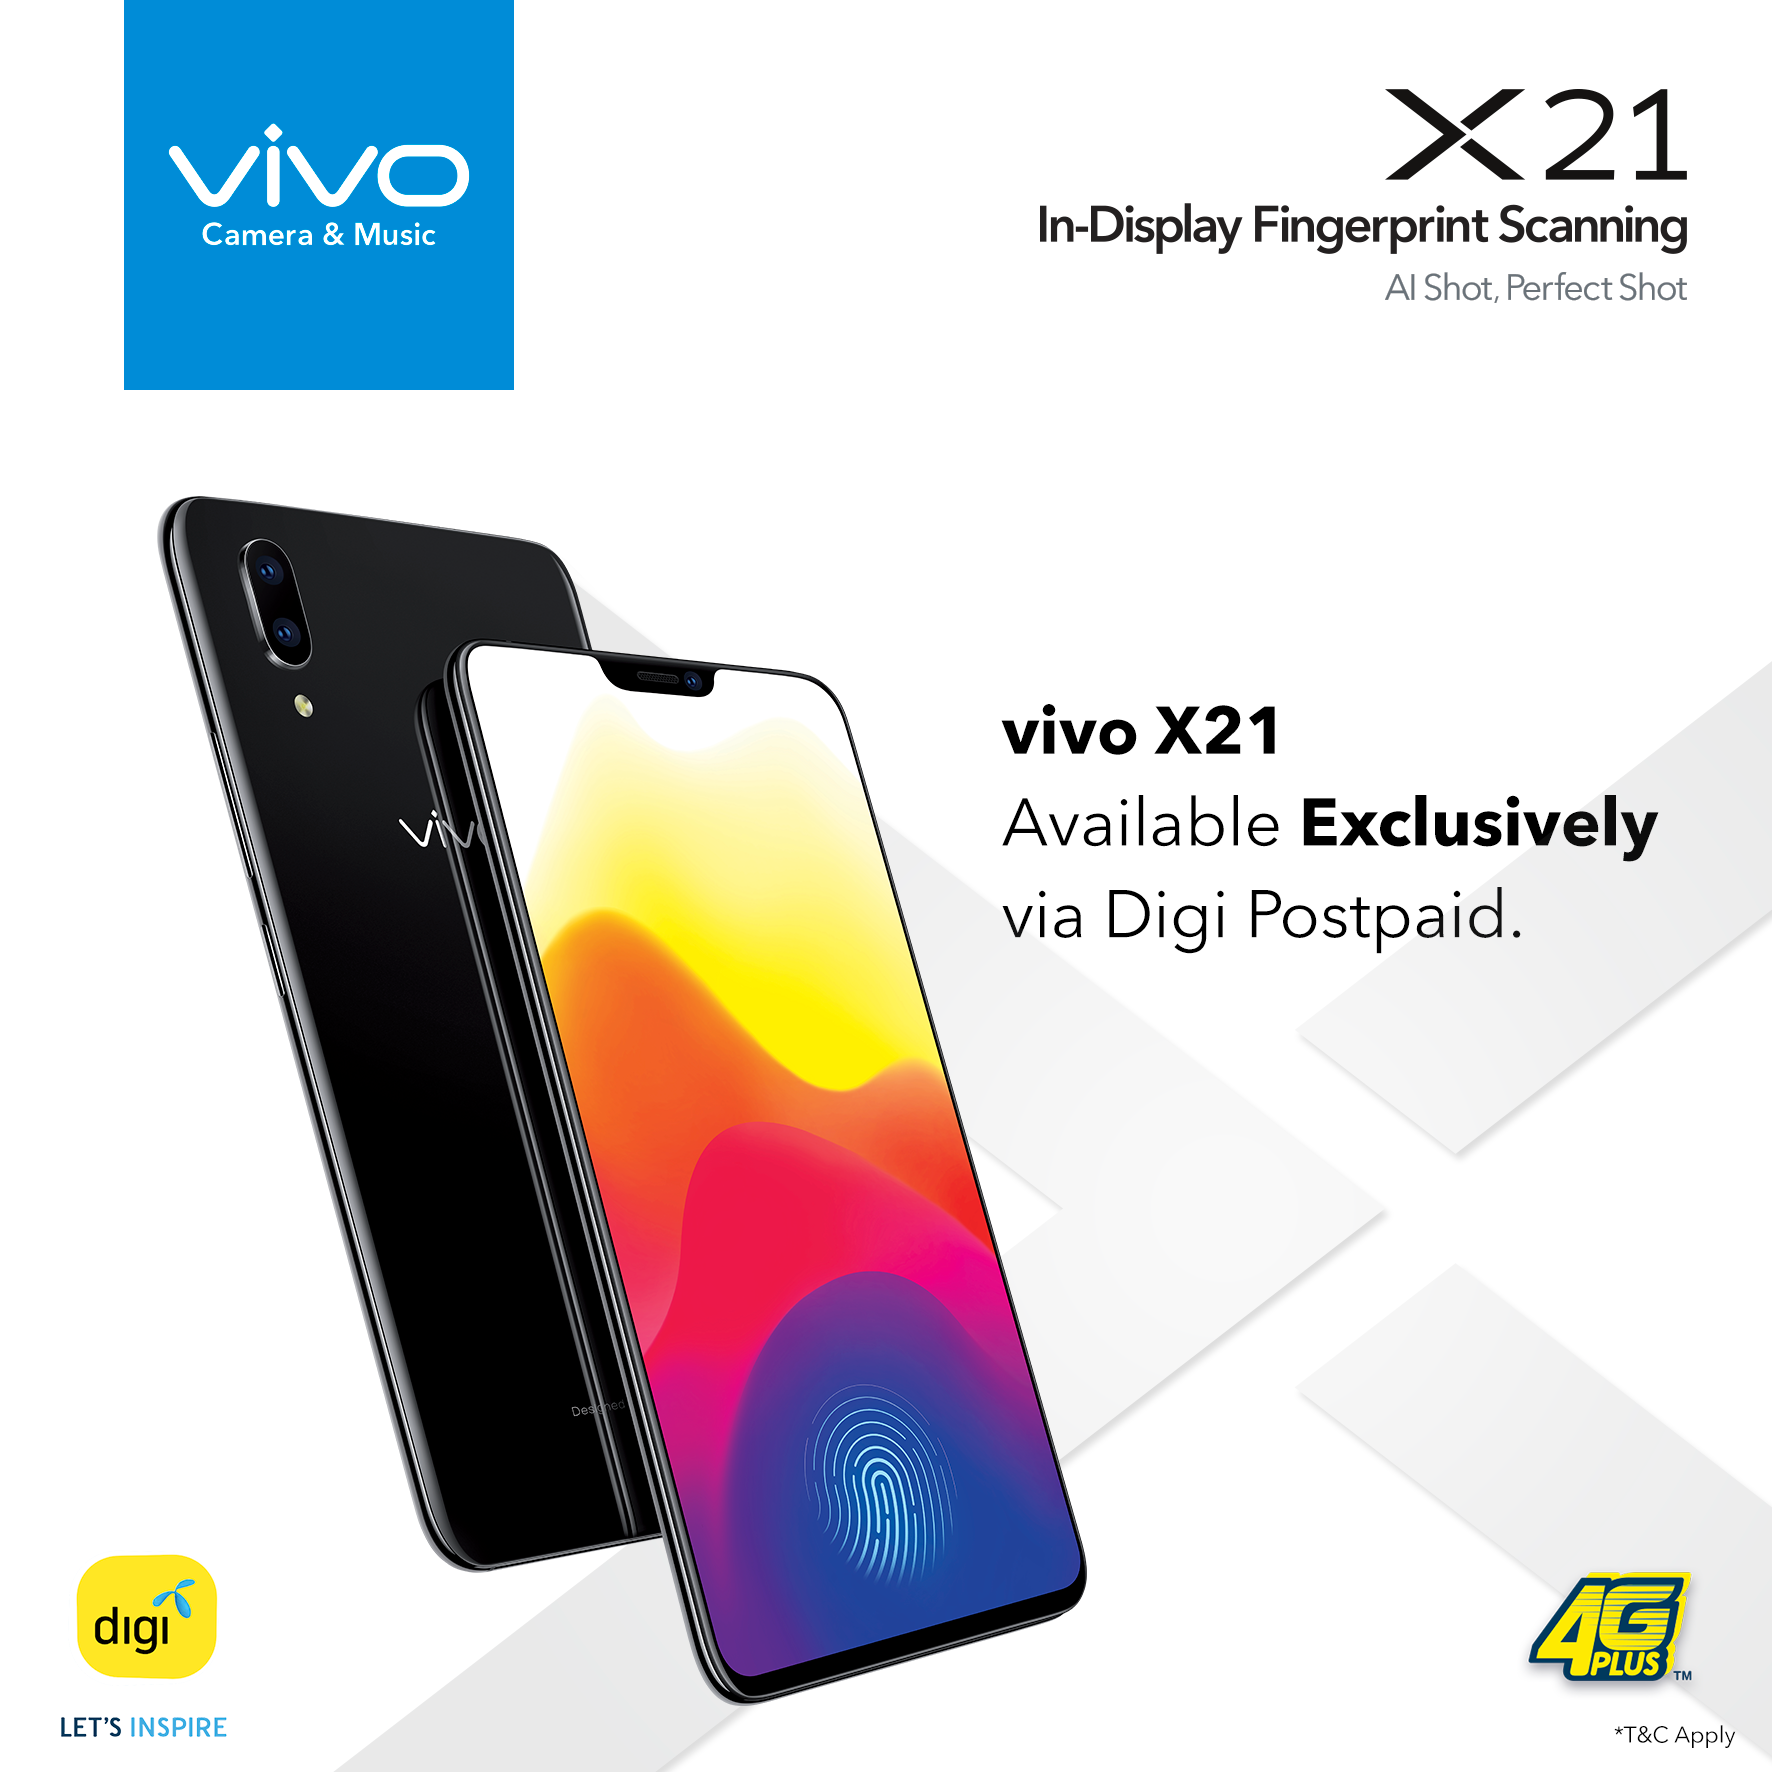 vivo X21 now on new Digi 190 Postpaid plan for just RM1 only